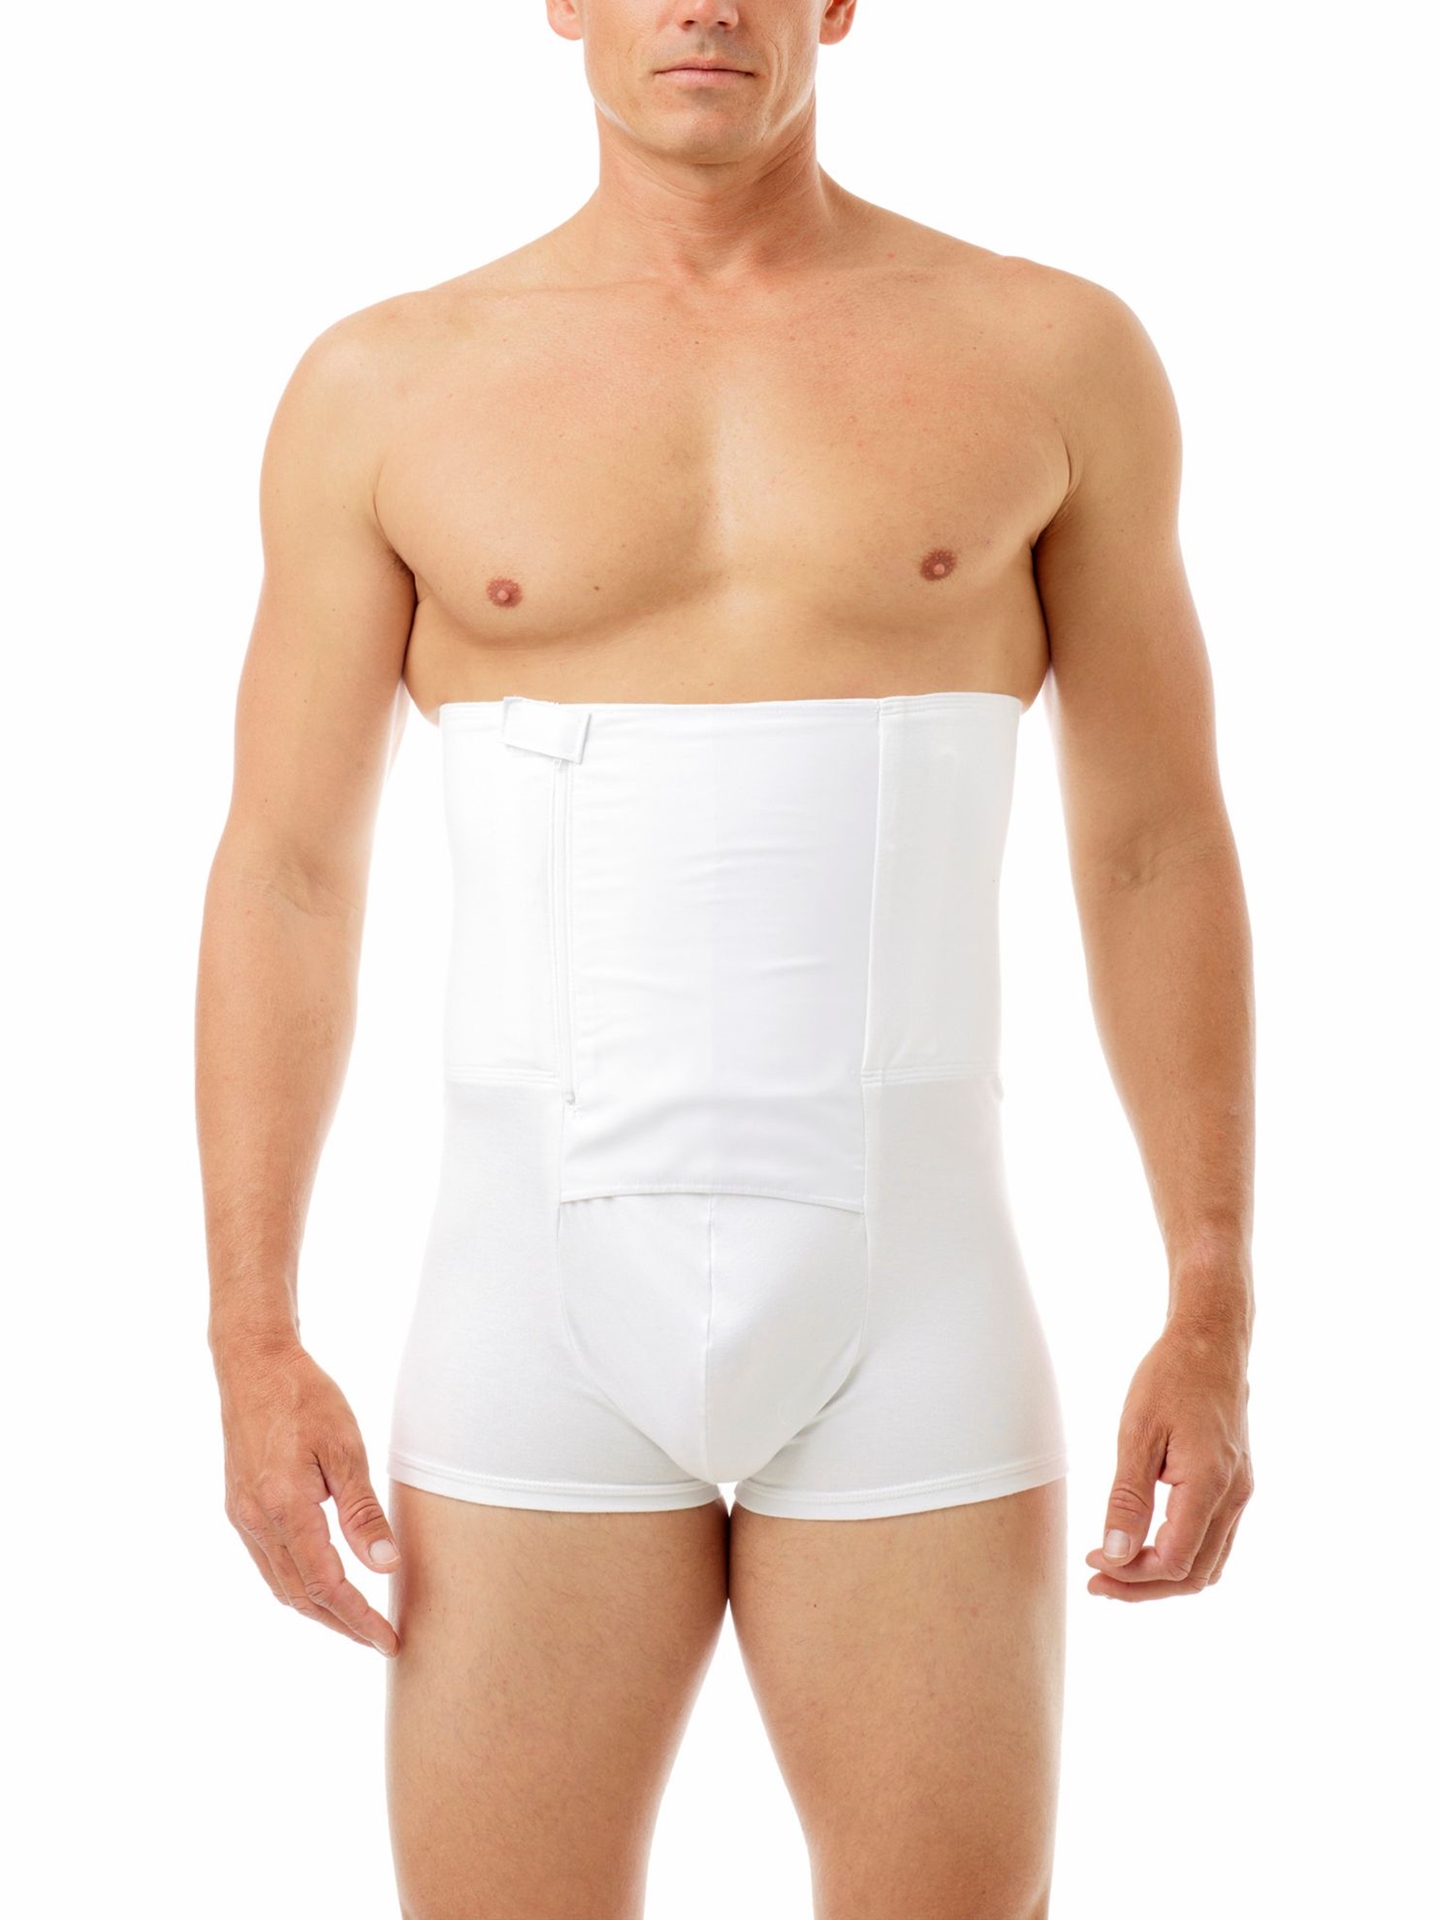 Hernia Support Underwear, Select Orders Ship Free!